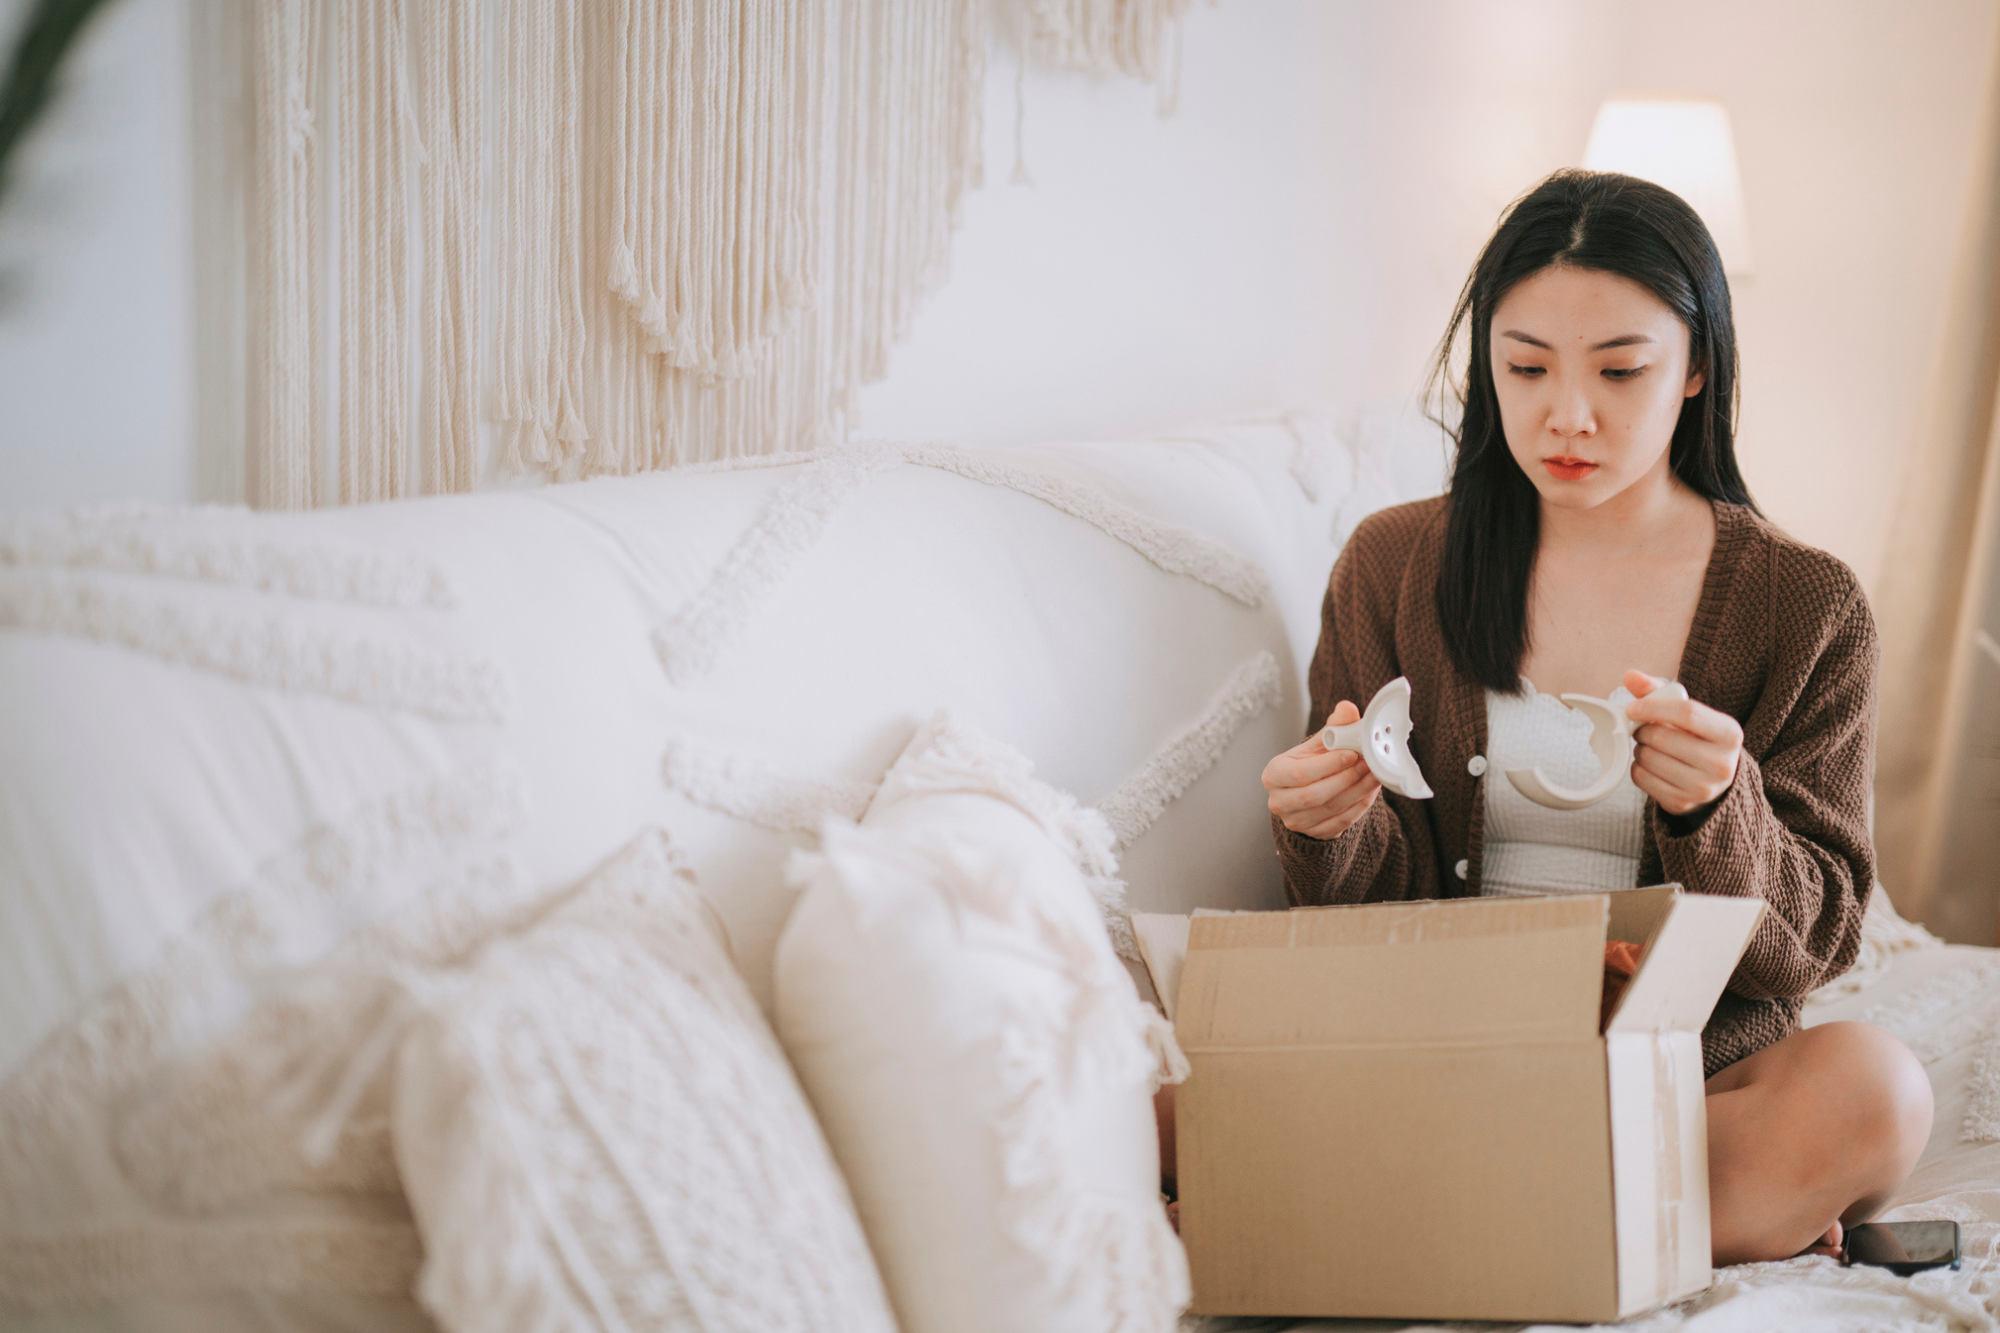 A female sitting on a couch with an open parcel holding a broken tea cup from her ecommerce order.